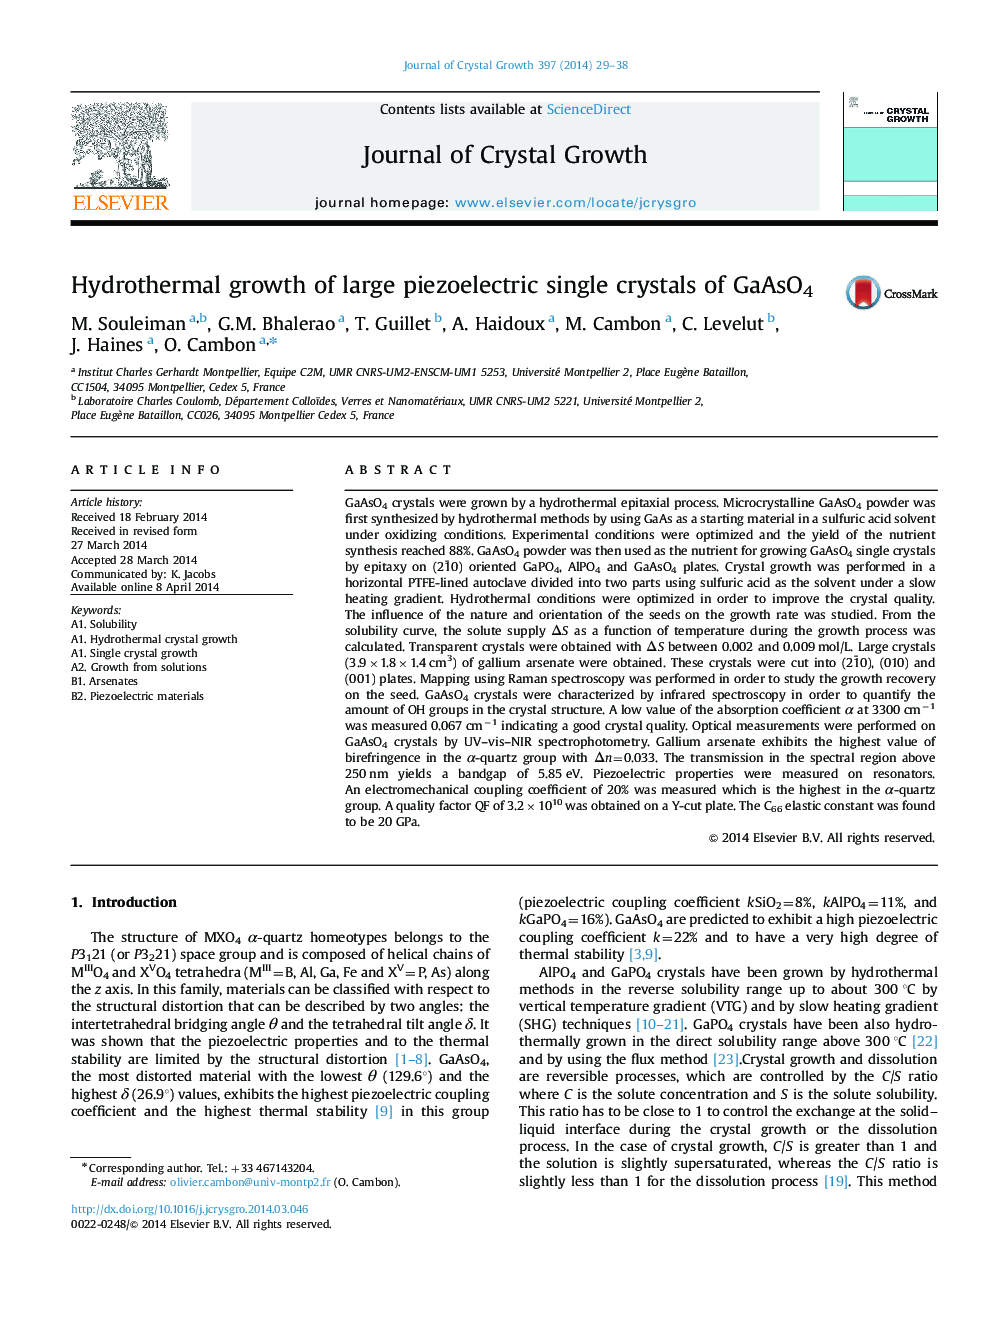 Hydrothermal growth of large piezoelectric single crystals of GaAsO4